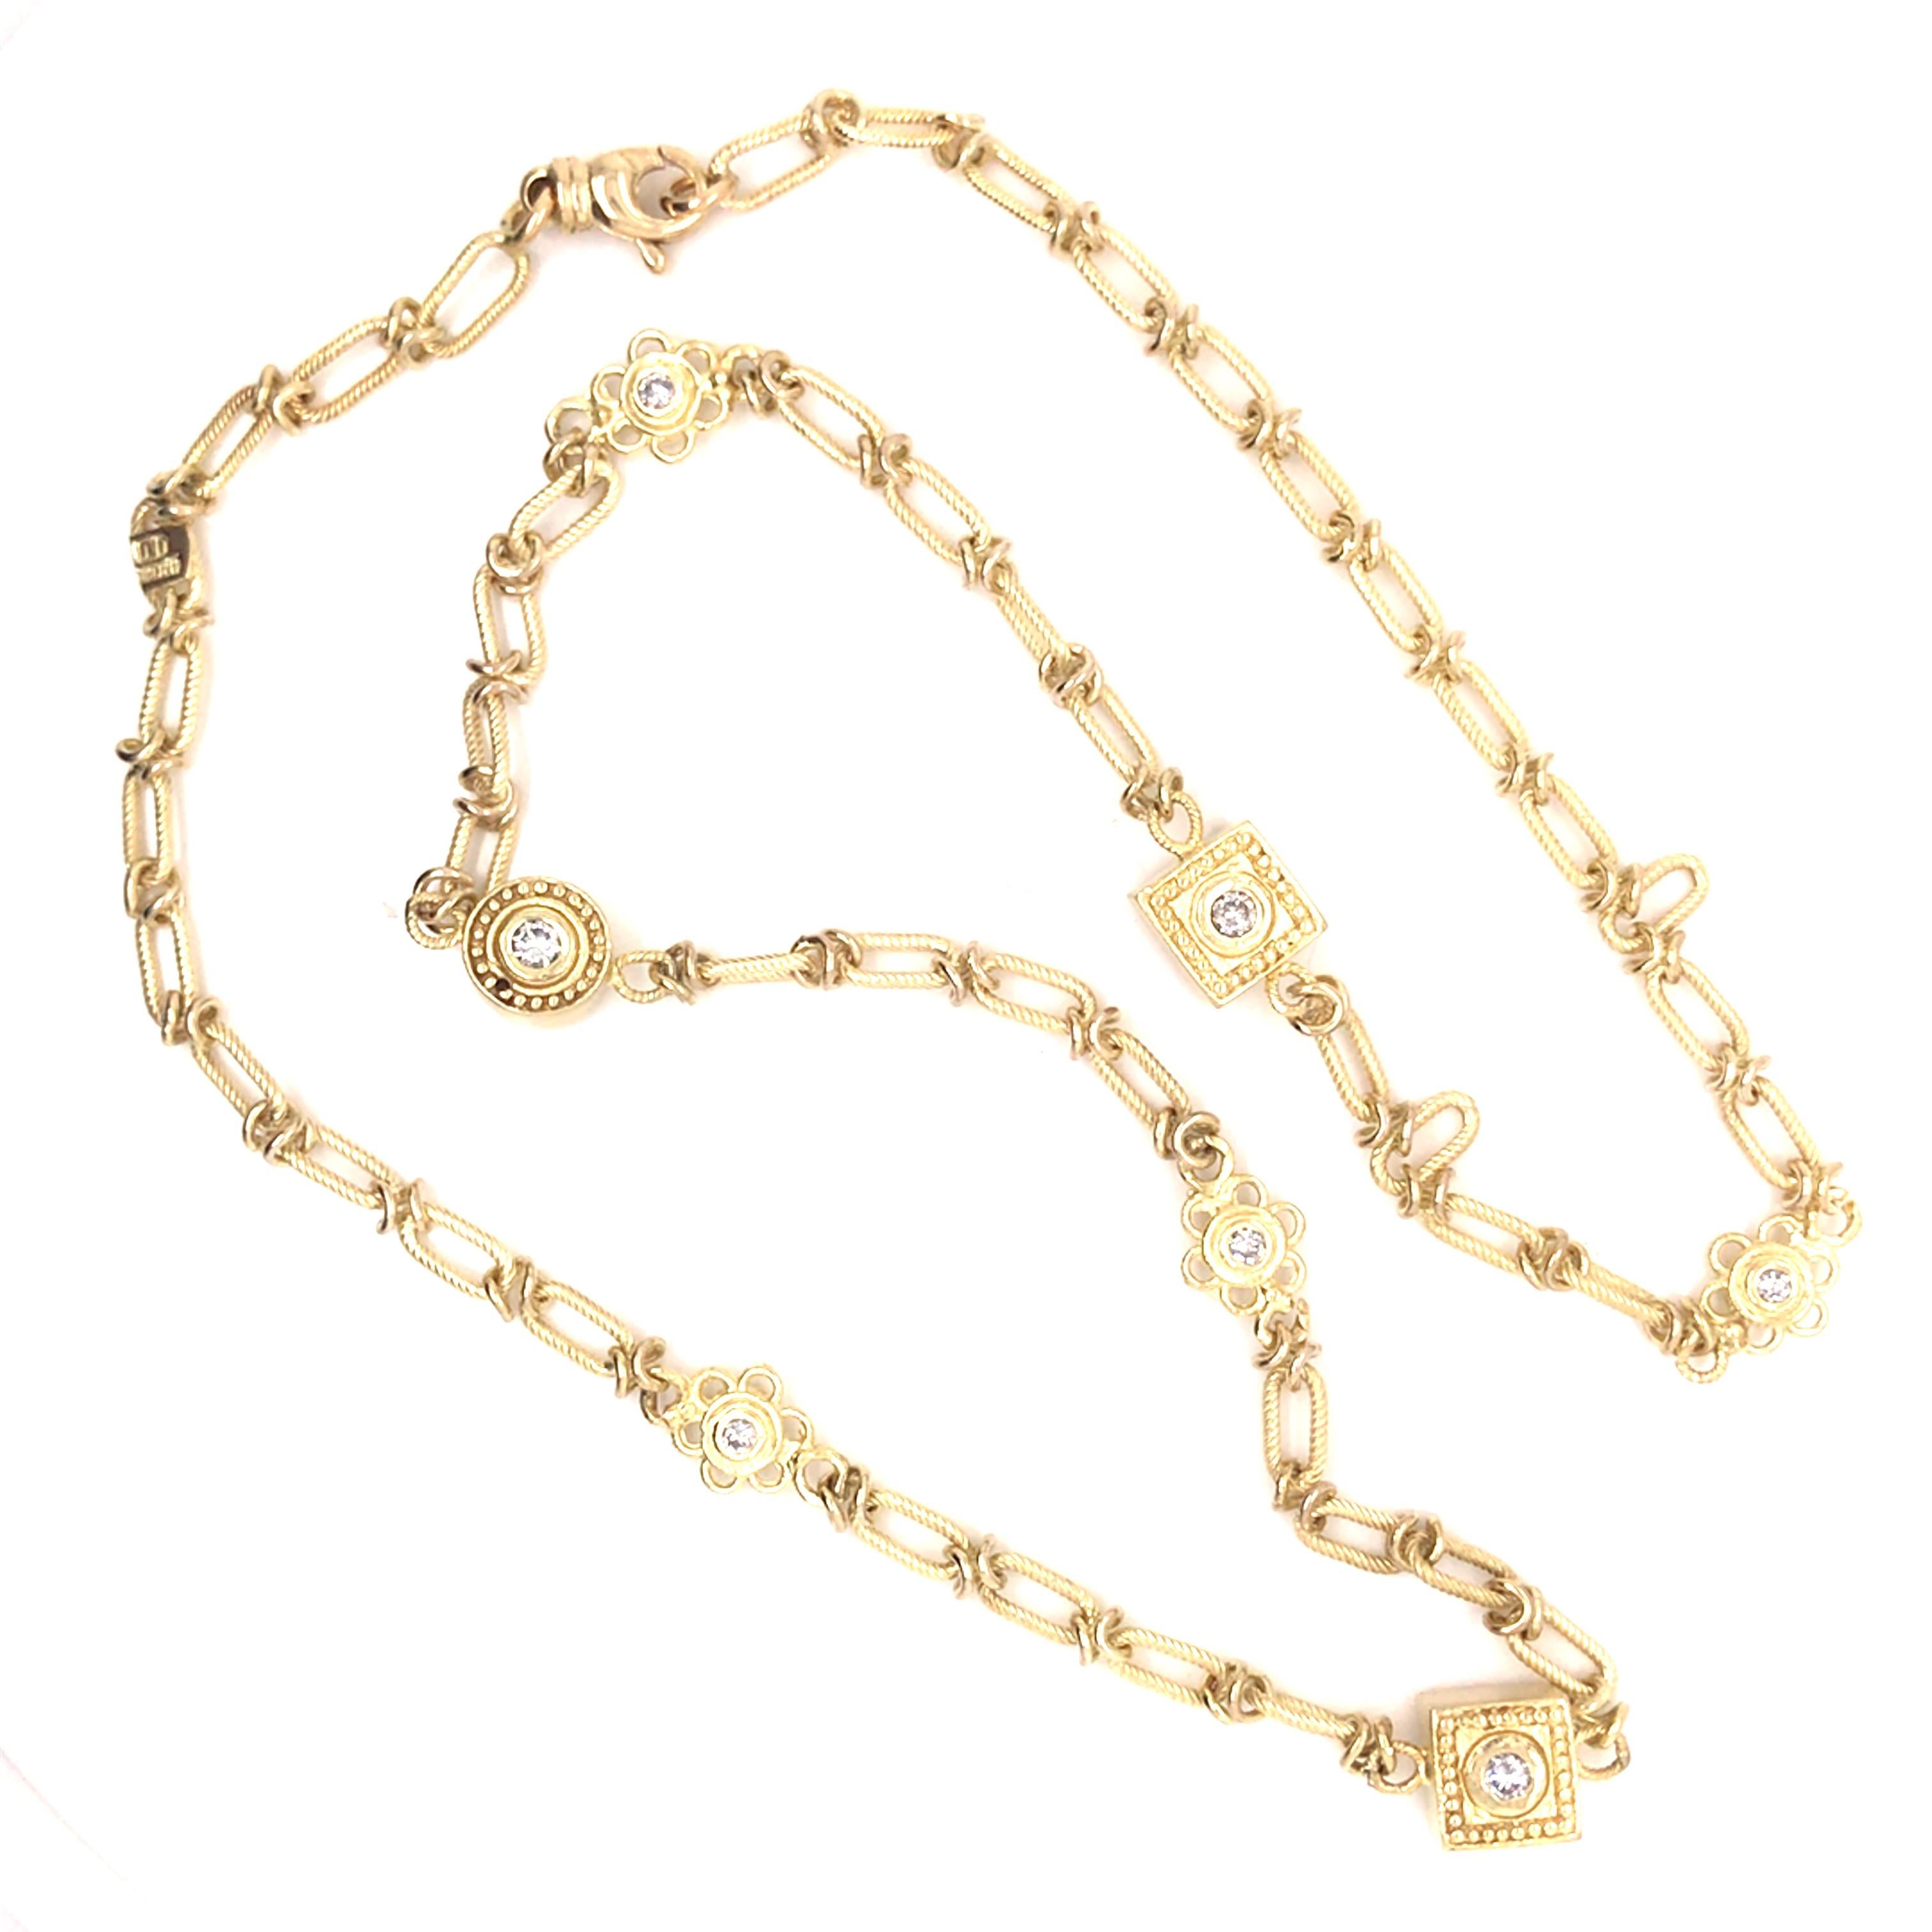 Vintage Diamond Station Chain Necklace in 14K Yellow Gold.  (14) Round Brilliant Cut Diamonds weighing 1.25 carat total weight, G-I in color and VS-I1 in clarity are expertly set.  The Necklace measures 18 inch in length. Lobster Claw clasp.  22.23